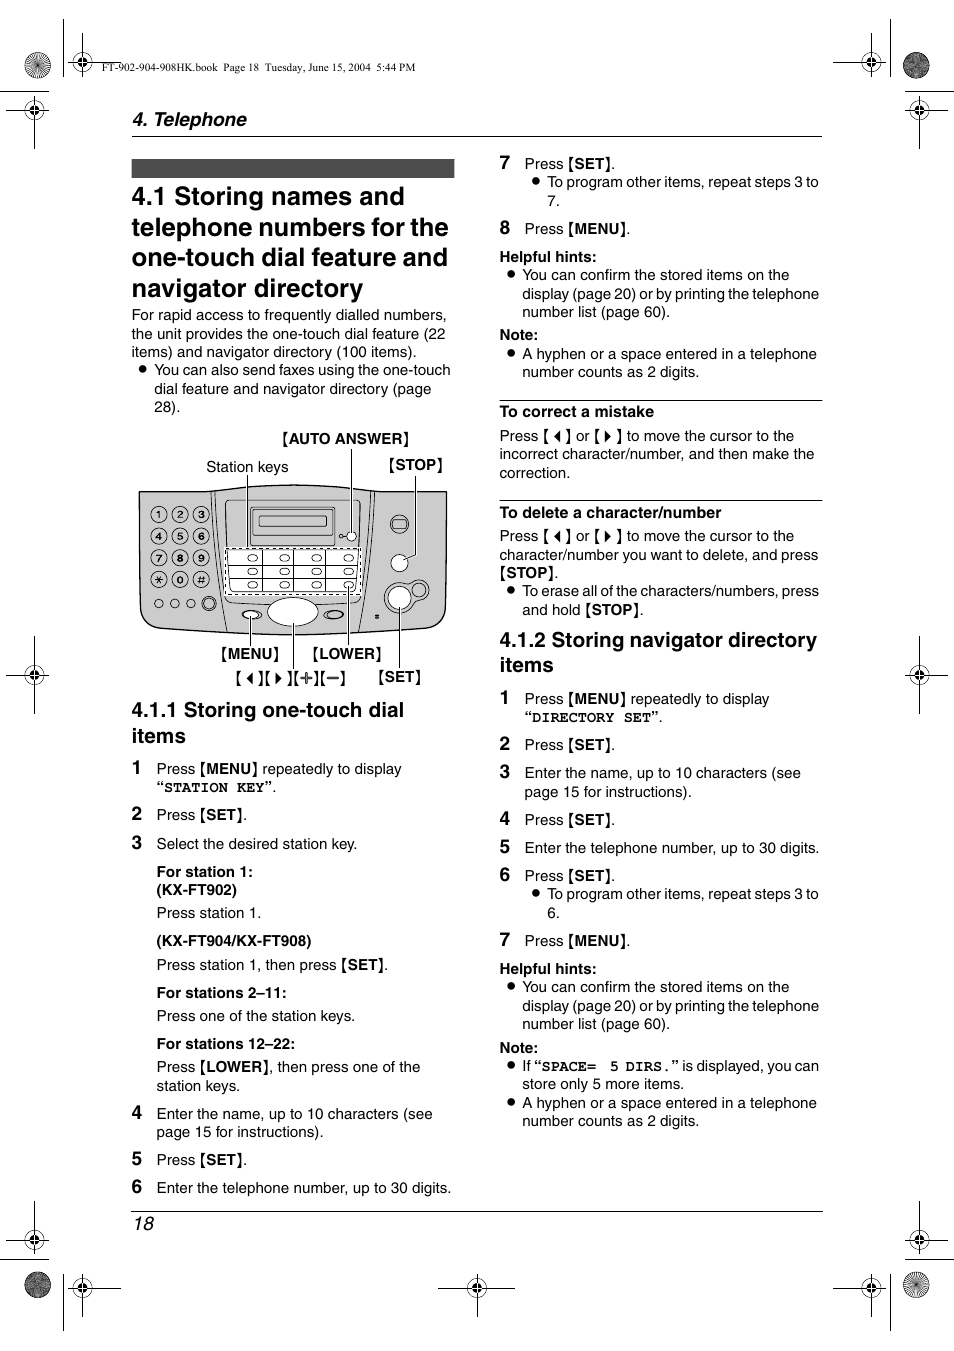 1 storing one-touch dial items, 2 storing navigator directory items | Panasonic KX-FT904HK User Manual | Page 18 / 20